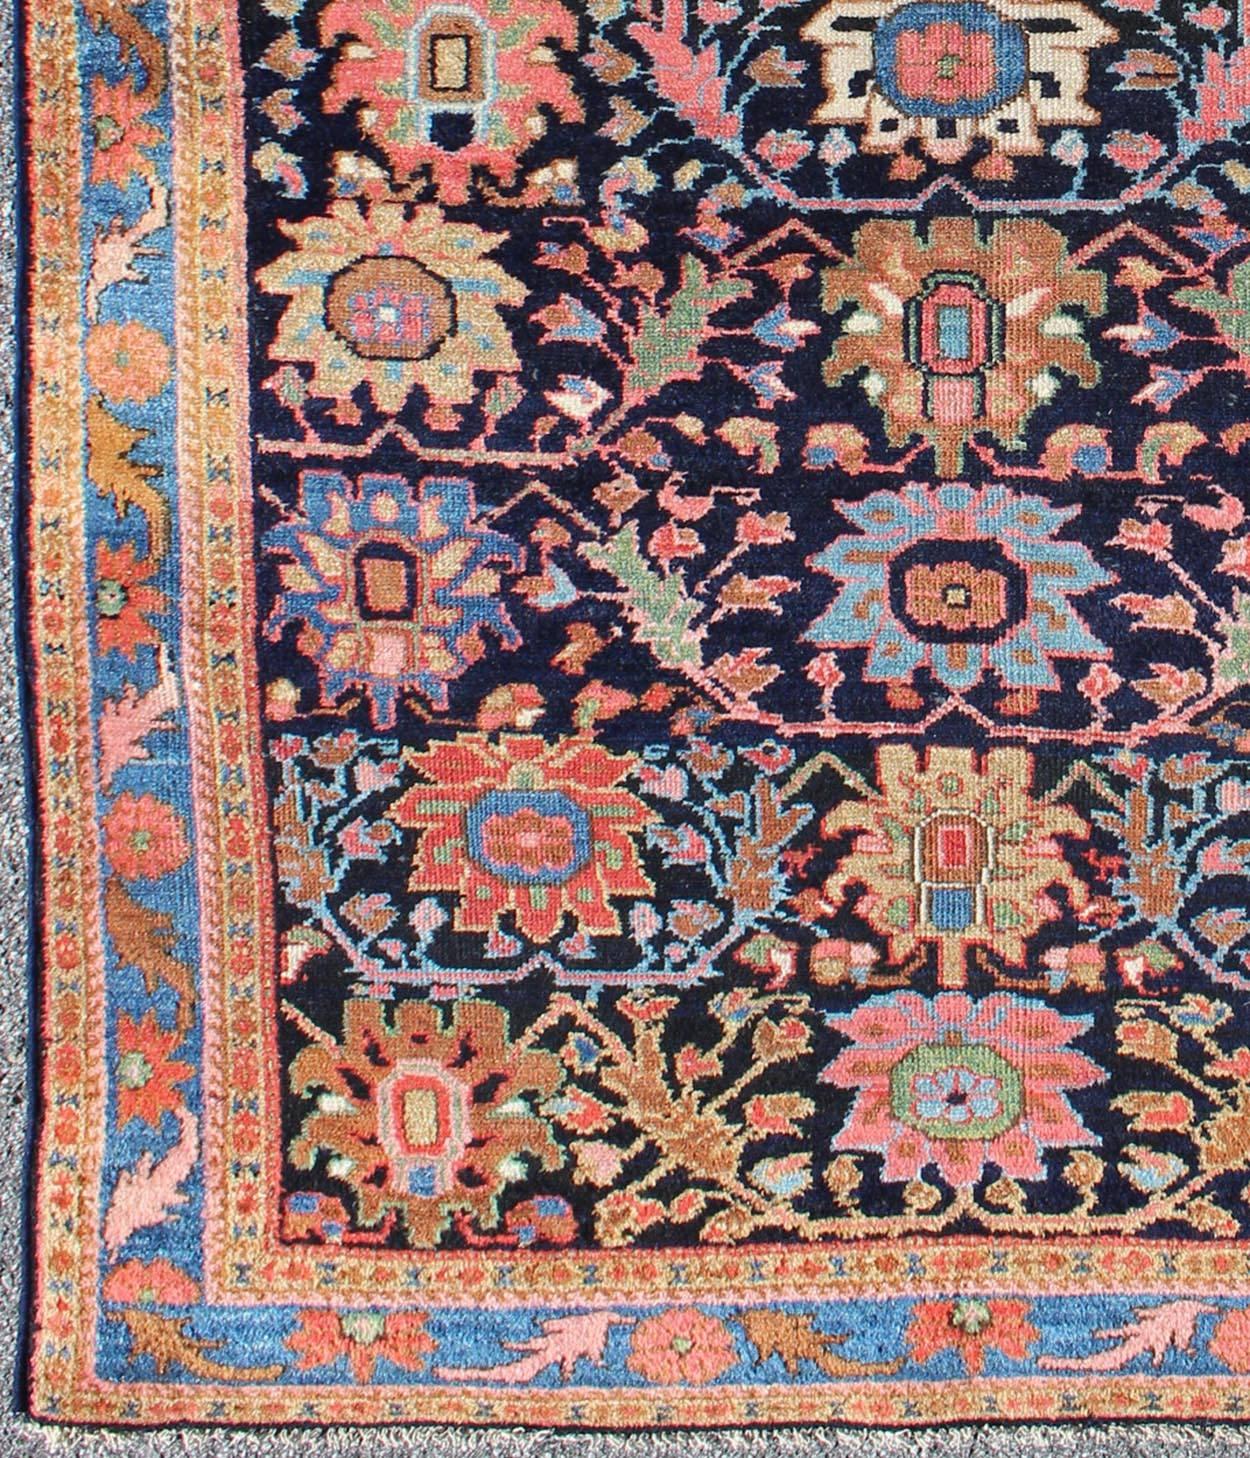 Pastel colored Persian Hamedan antique rug with large floral motifs, rug ema-7526, country of origin / type: Iran / Hamadan, circa 1910

This beautiful antique early 20th century Persian Hamadan carpet features an all-over design of repeating